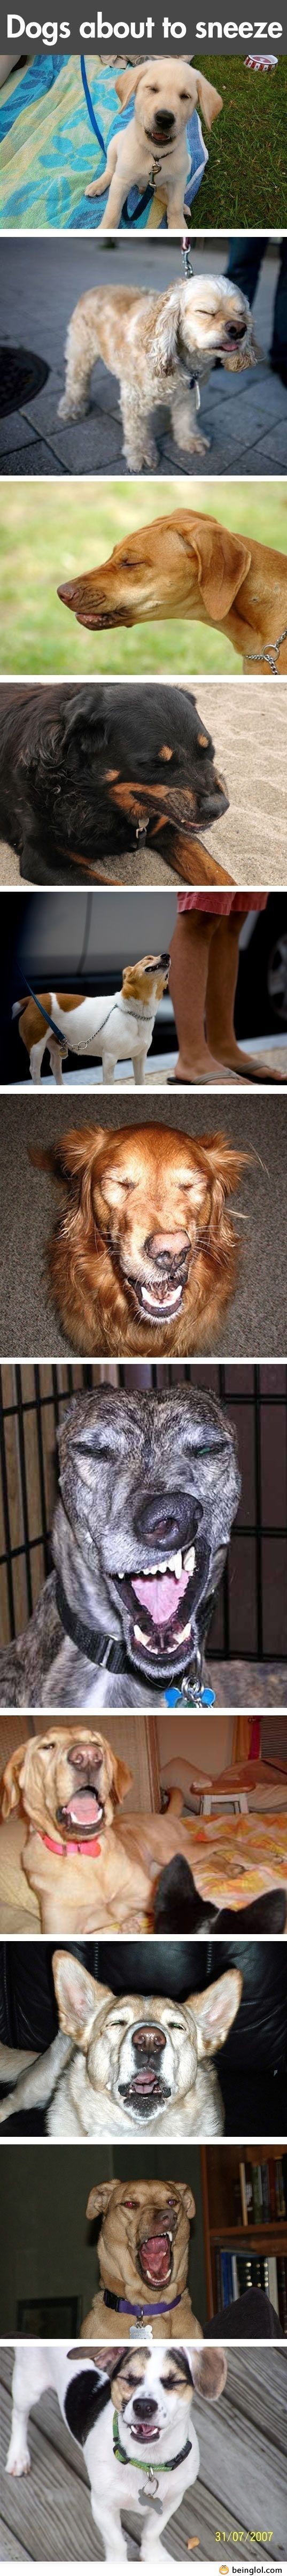 Funny Dogs About to Sneeze